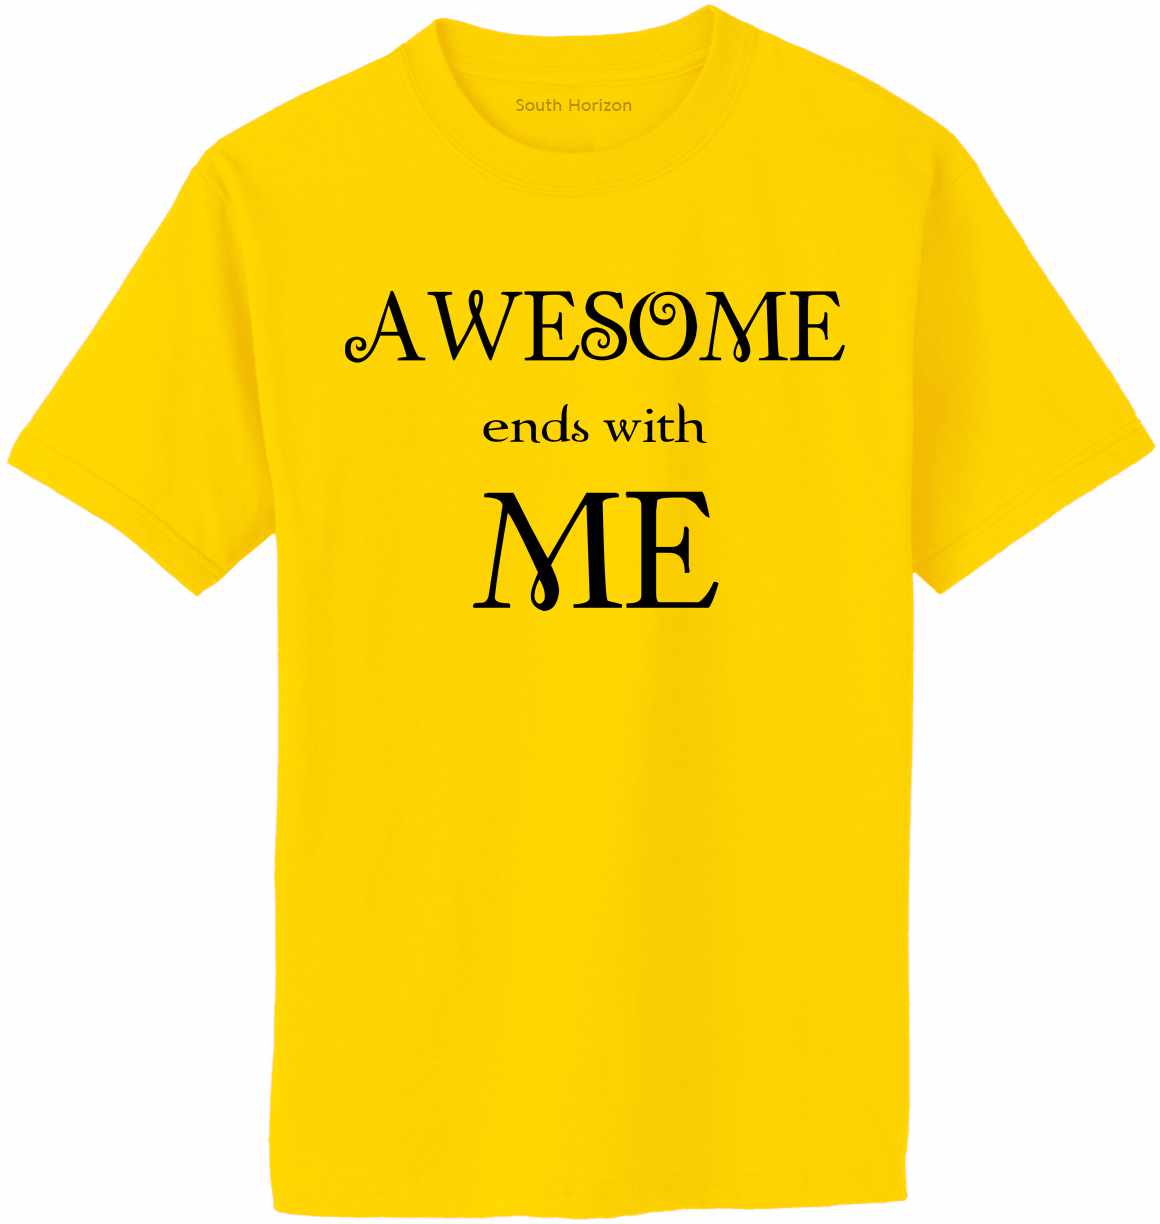 Awesome Ends with Me Adult T-Shirt (#817-1)